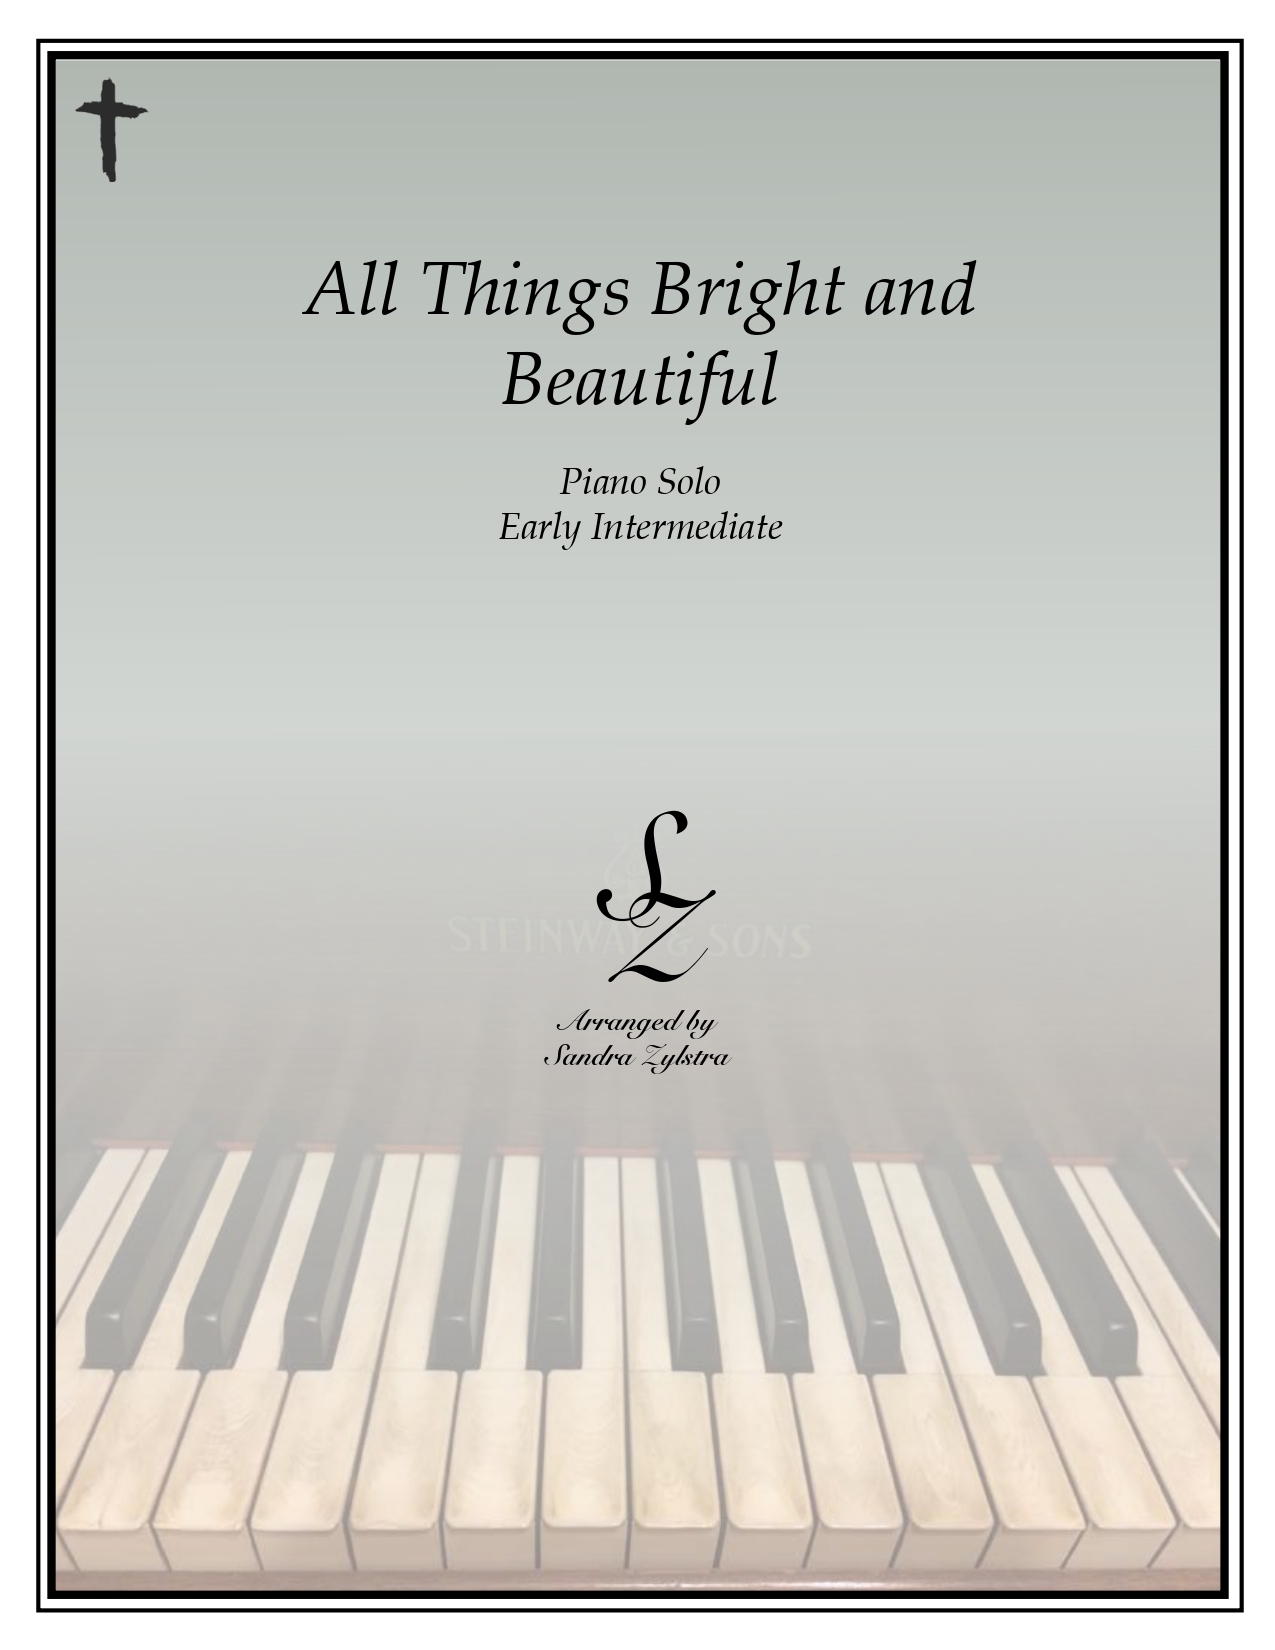 All Things Bright And Beautiful early intermediate piano cover 1 page 00011